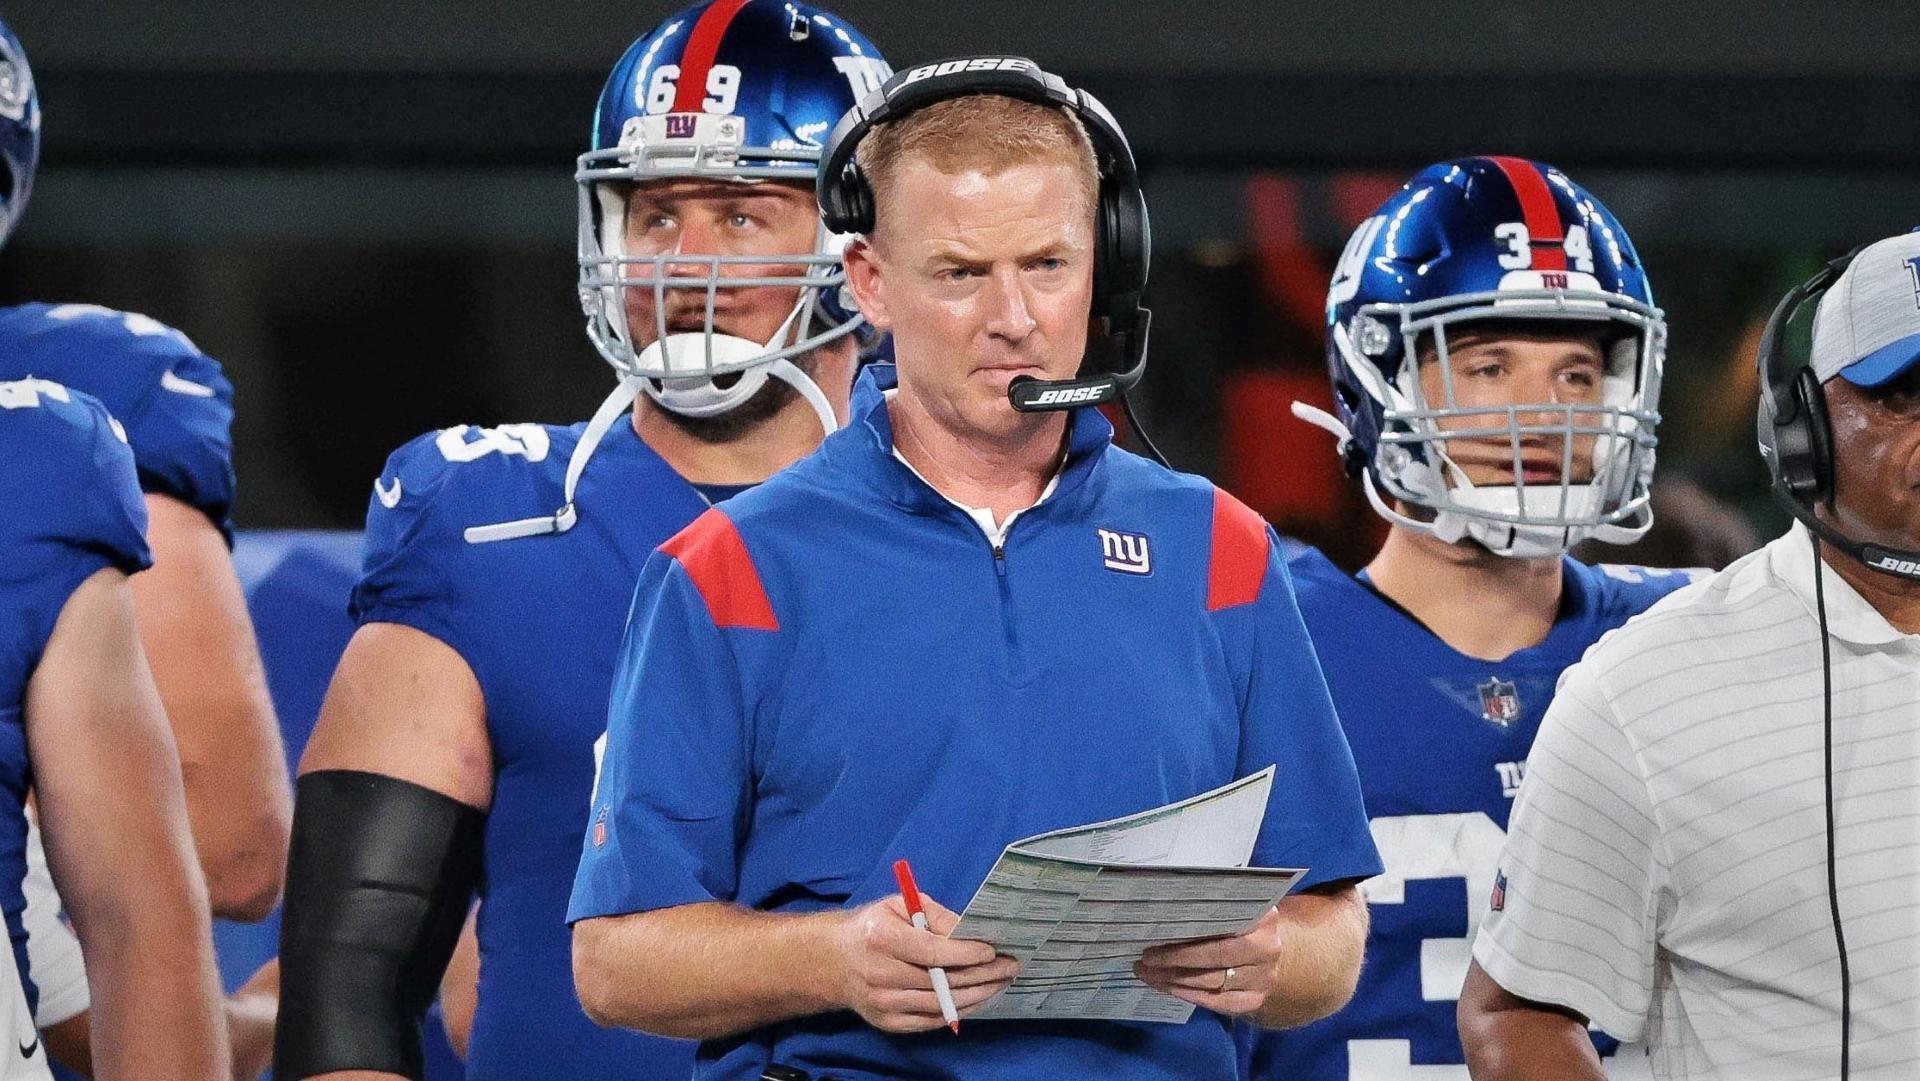 Aug 14, 2021; East Rutherford, New Jersey, USA; New York Giants offensive coordinator Jason Garrett, center, looks on during the first half against the New York Jets at MetLife Stadium. Mandatory Credit: Vincent Carchietta-USA TODAY Sports / © Vincent Carchietta-USA TODAY Sports